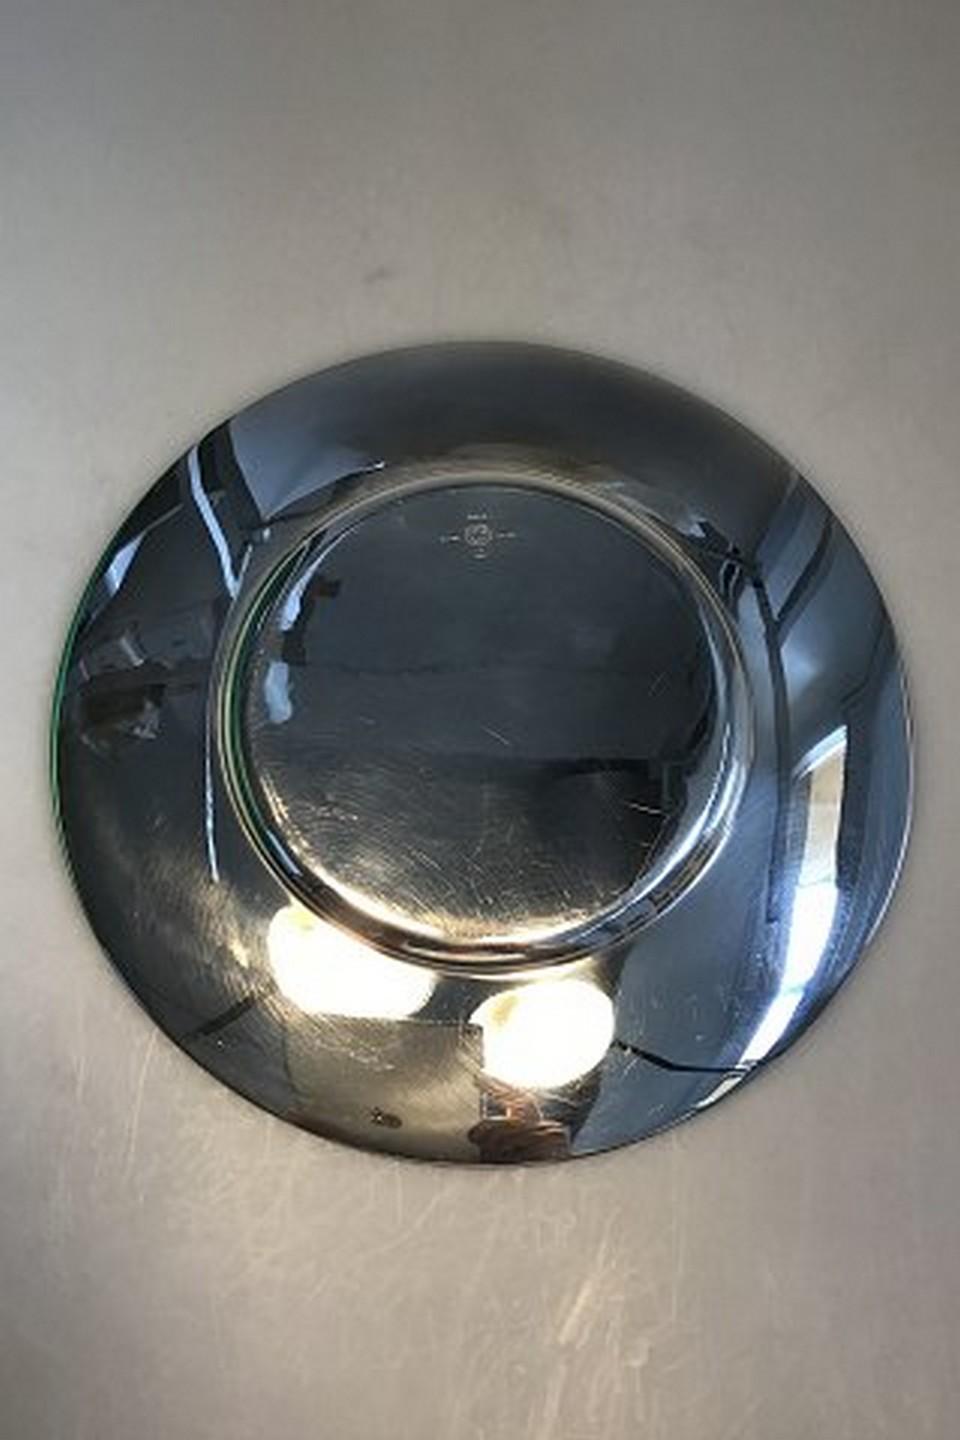 Georg Jensen sterling silver place plate/charger no 1014 
Measures: Diameter 27.5 cm/10.82